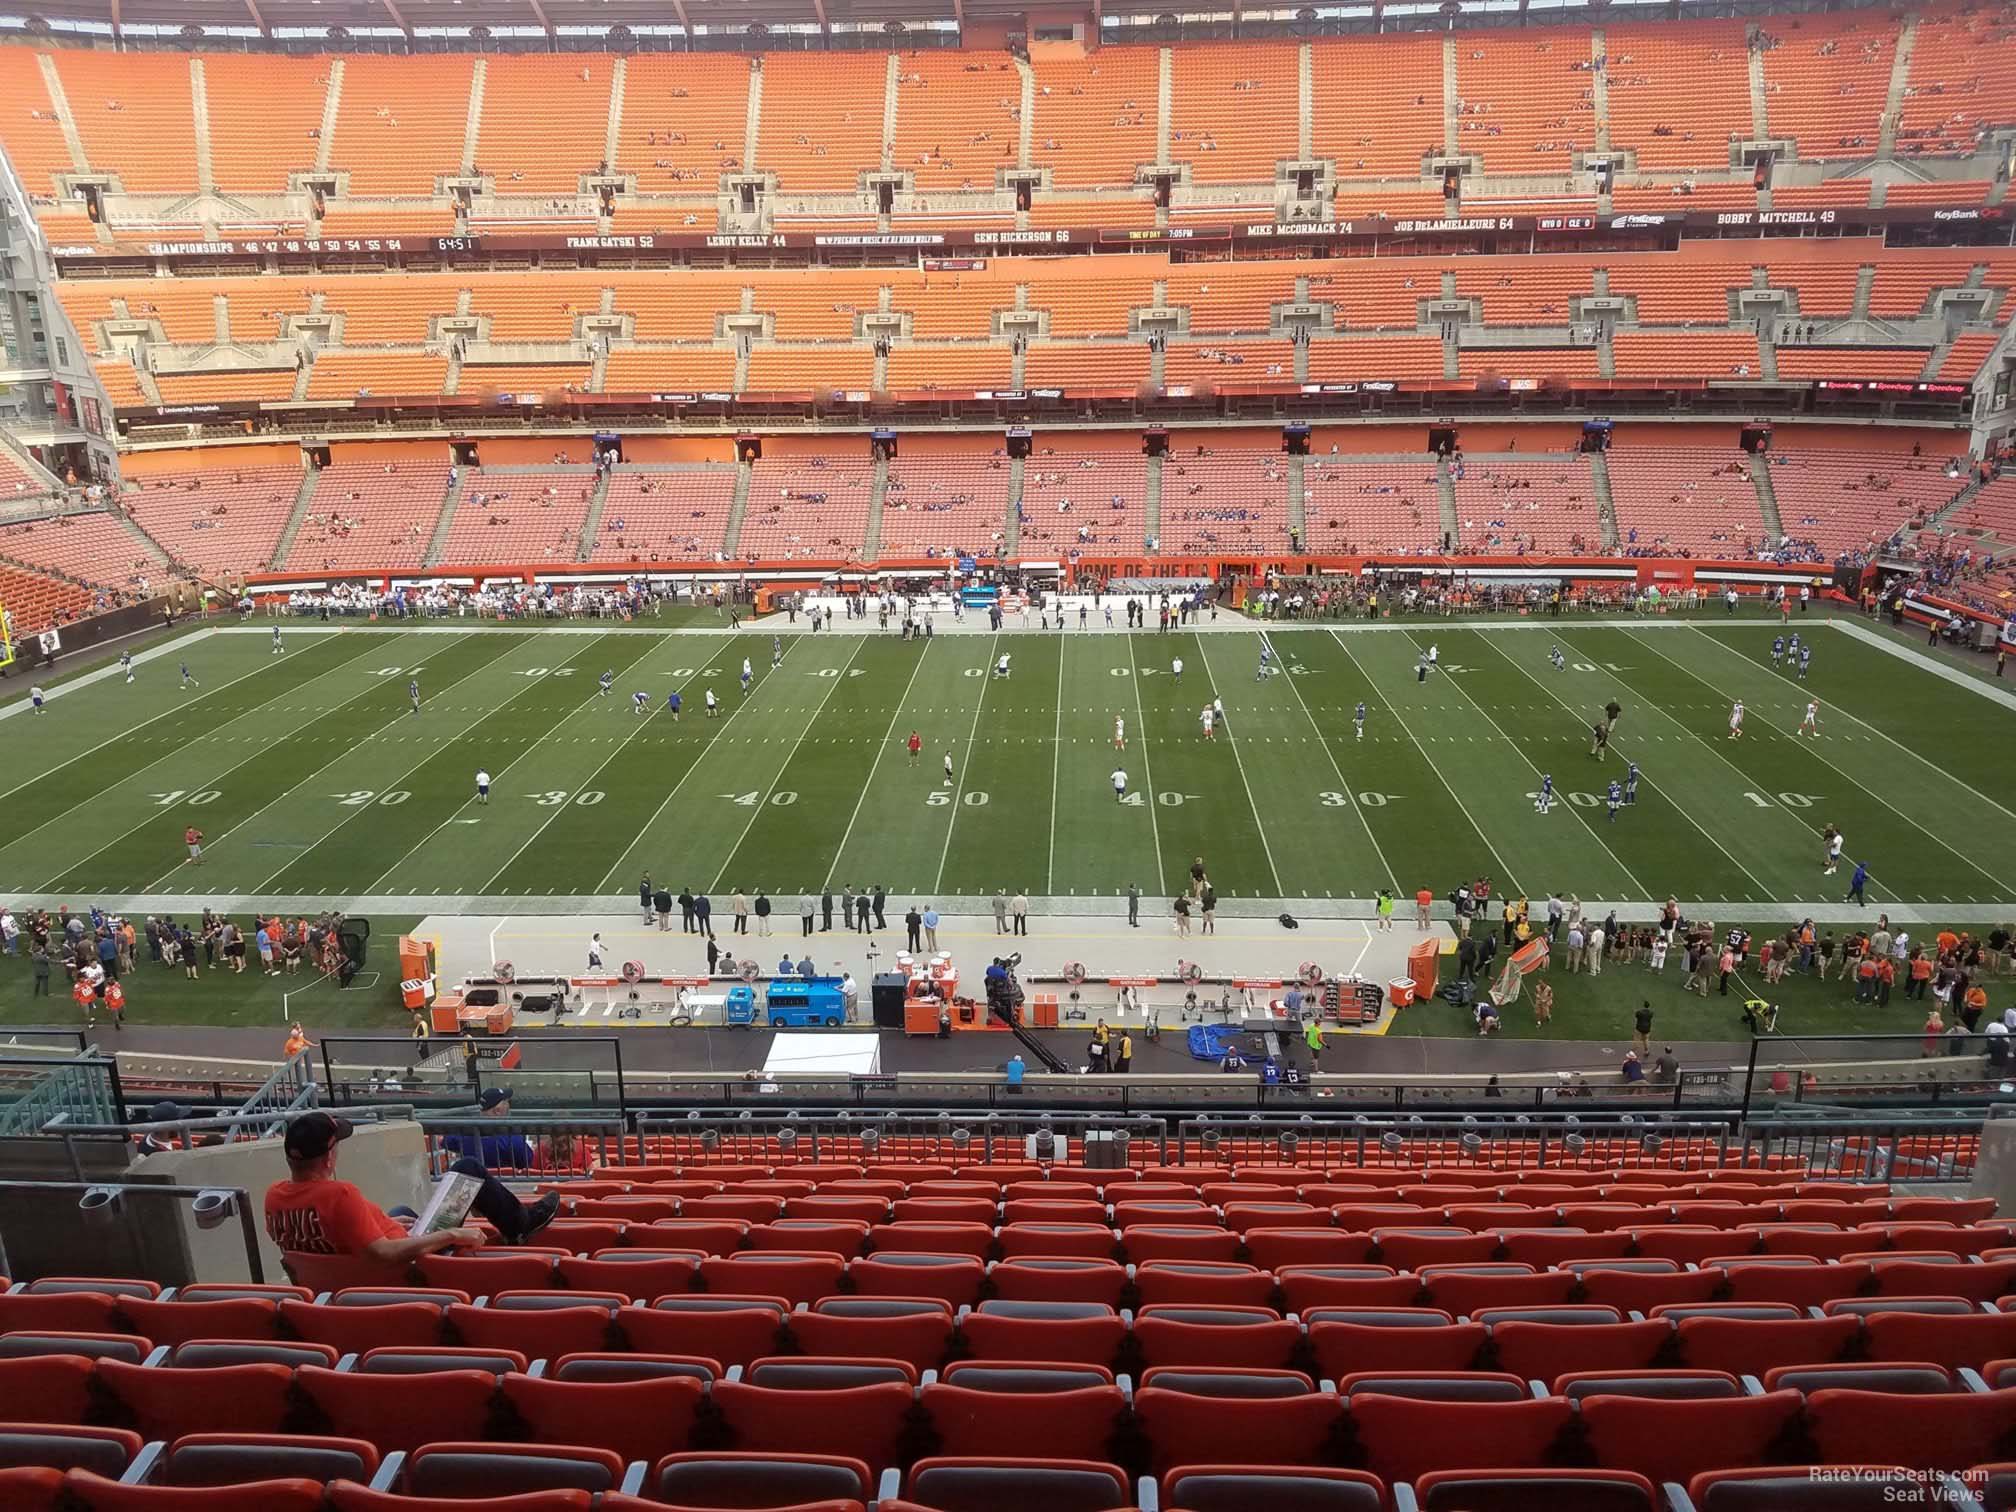 section 334, row 18 seat view  - cleveland browns stadium